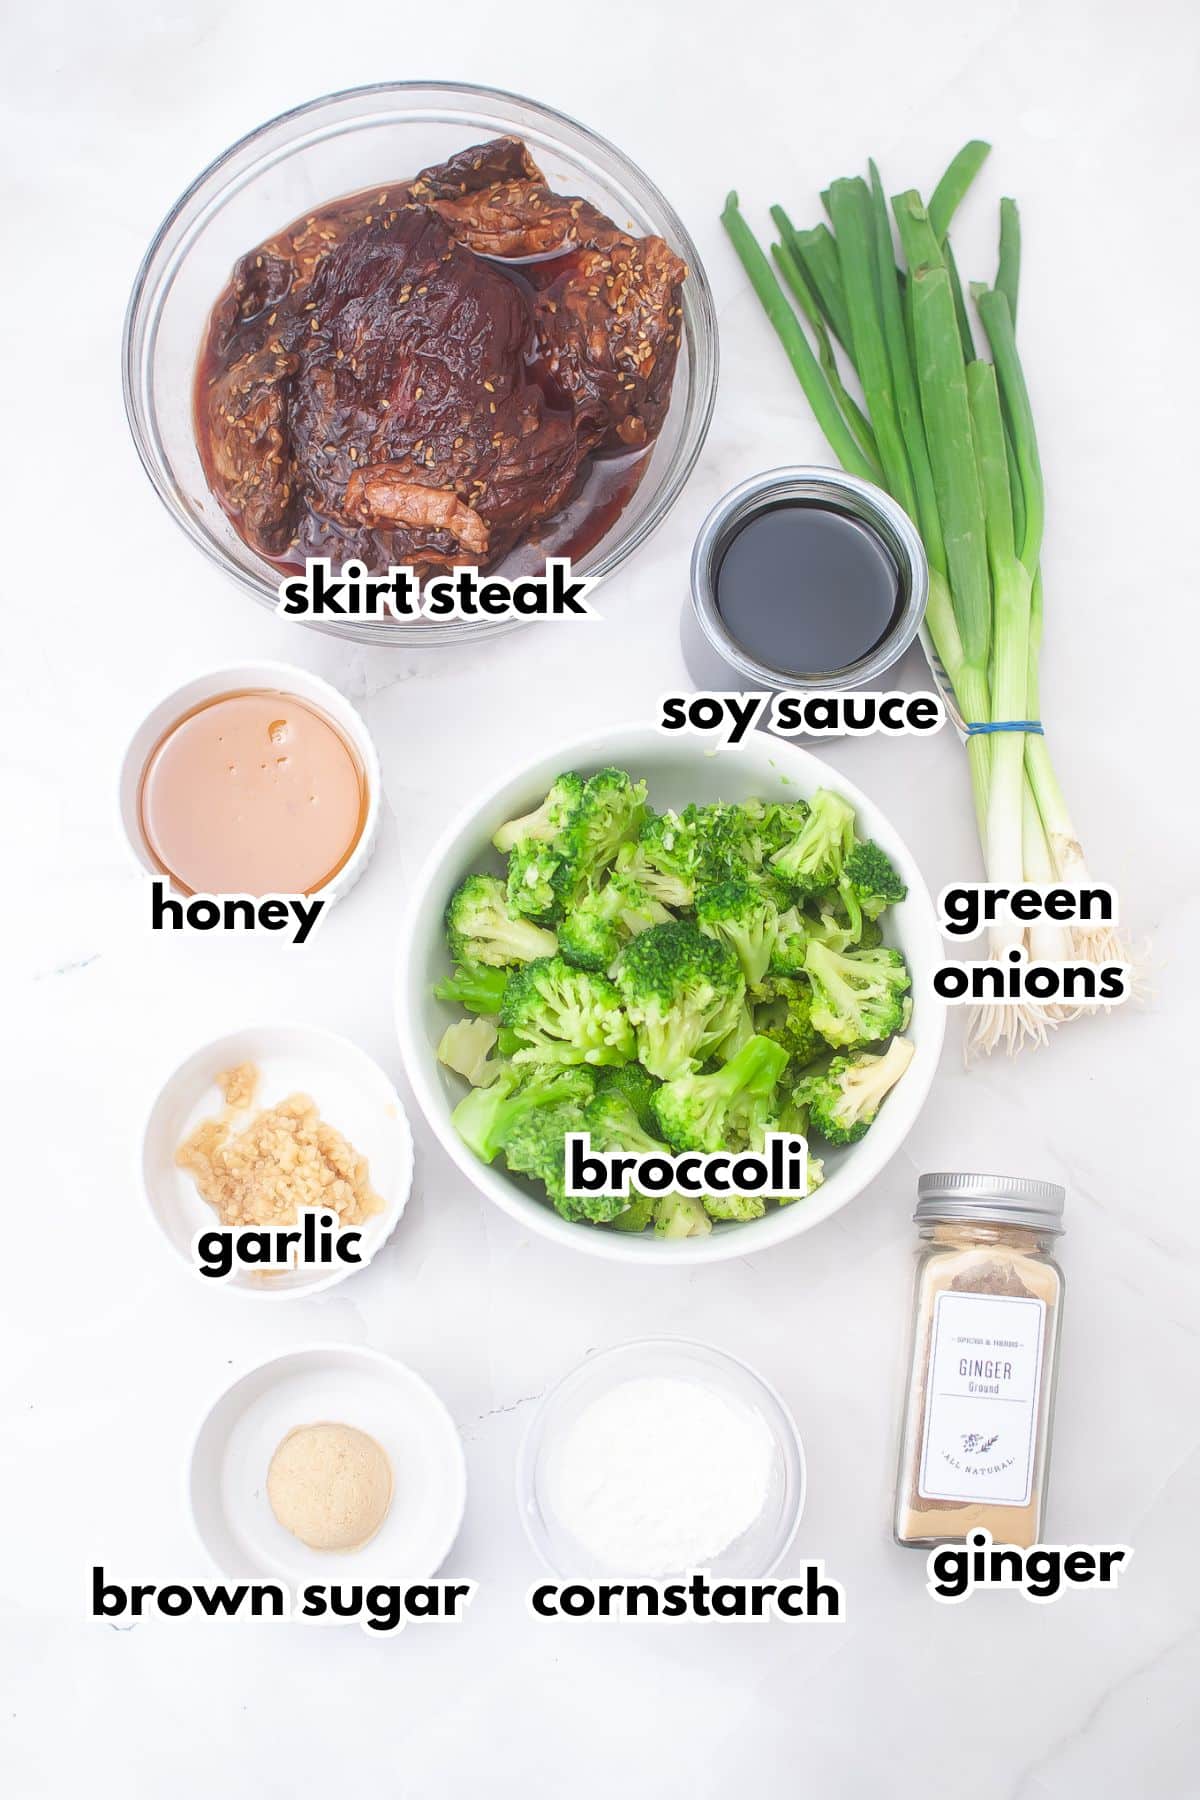 bowls of skirt steak, honey, soy sauce, green onions, garlic, broccoli, brown sugar, cornstarch, and ginger on a counter.